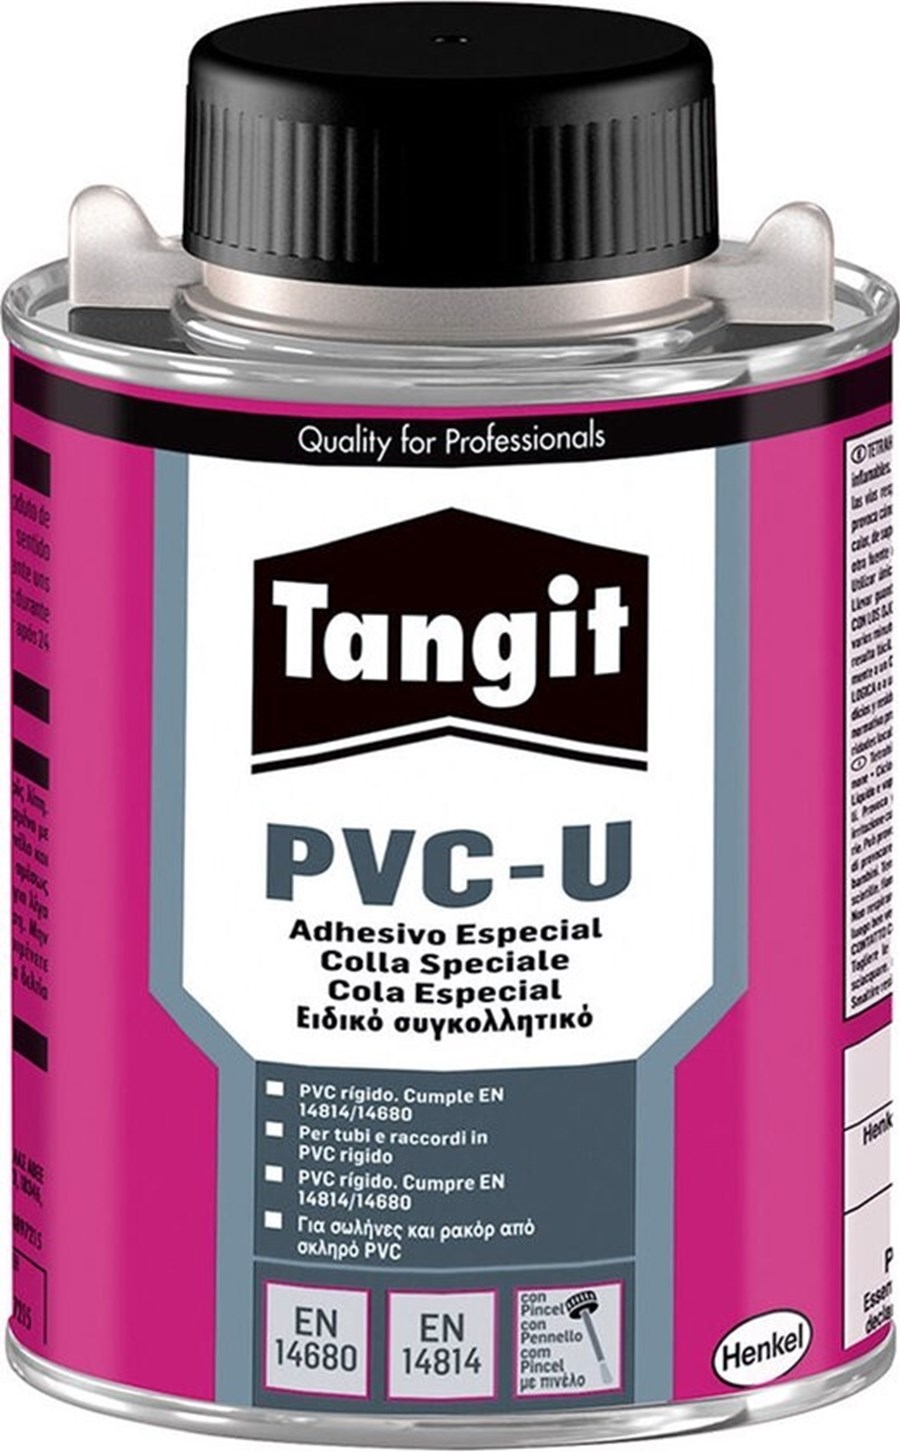 Tangit 250 ml canister